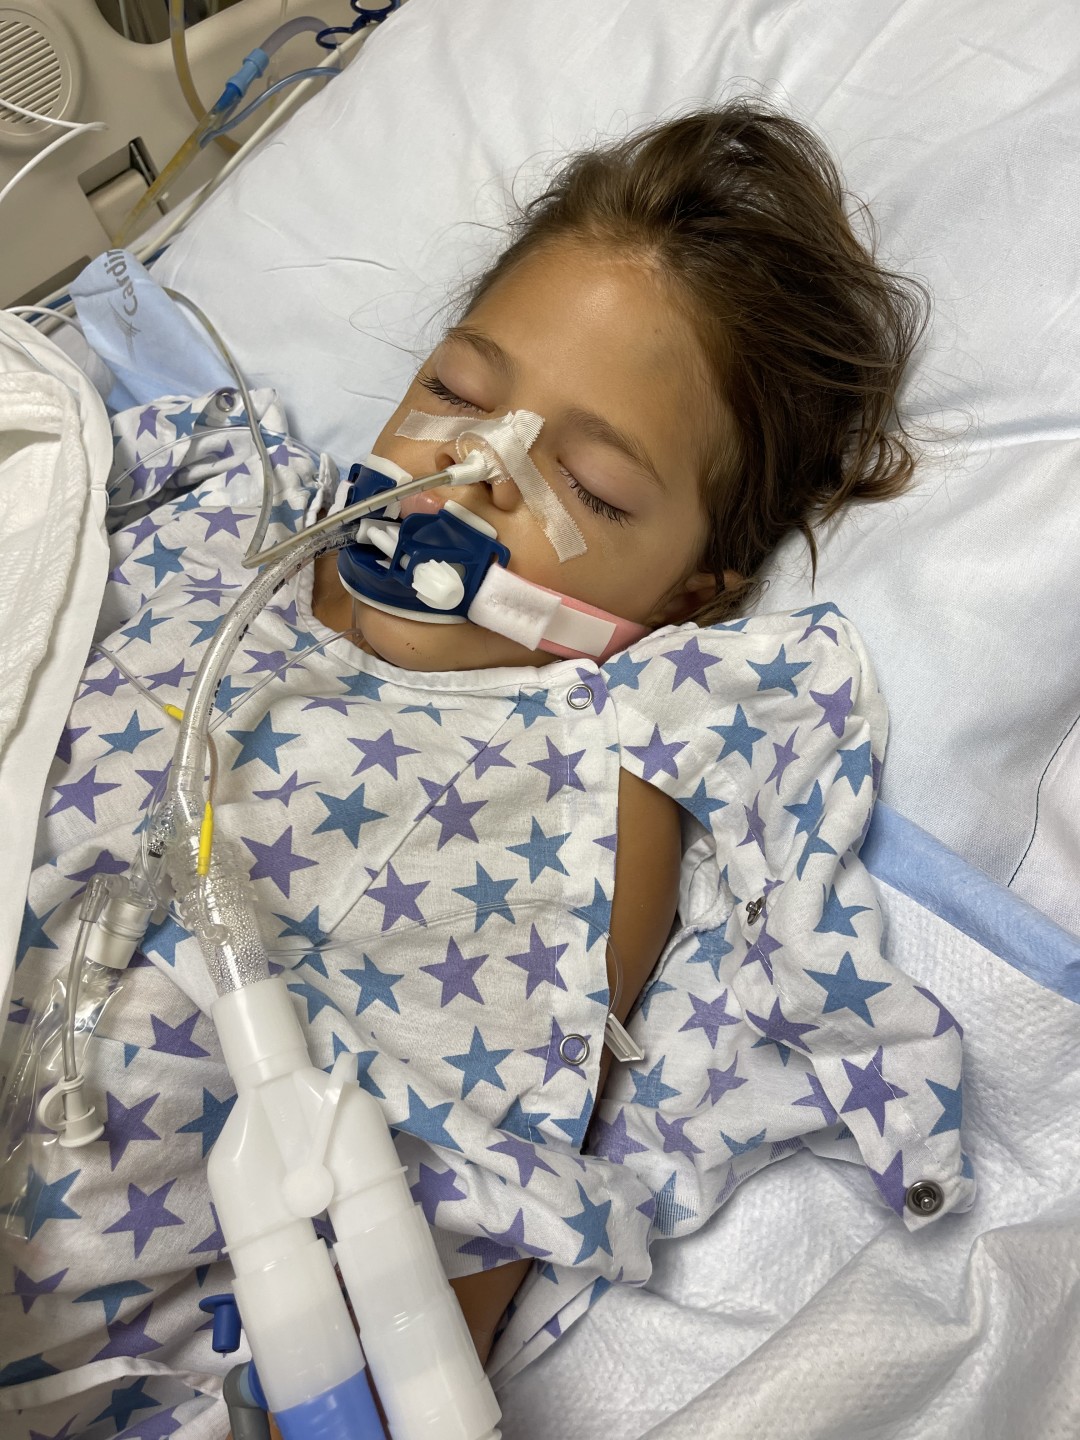 5-year-old girl is fighting for her life after being bitten by a snake